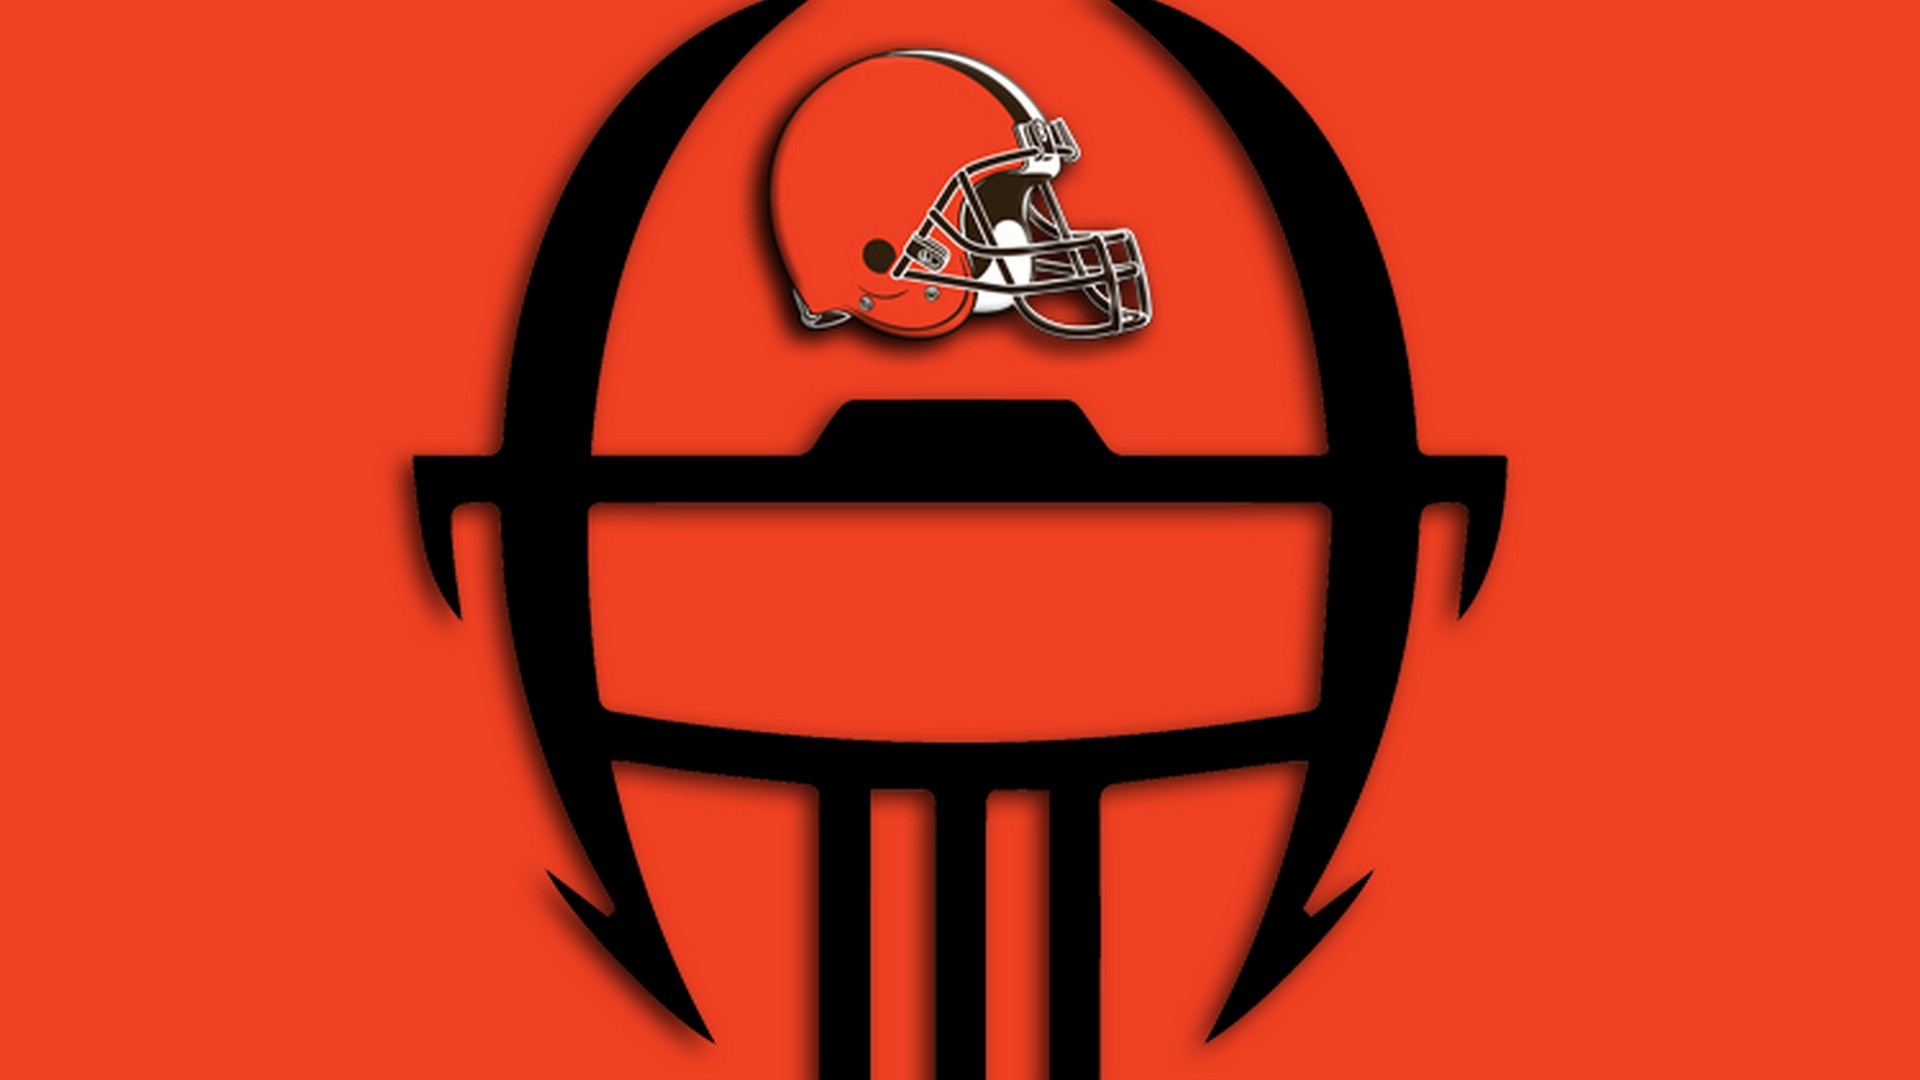 Cleveland Browns Wallpaper for Computer With high-resolution 1920X1080 pixel. Download and set as wallpaper for Desktop Computer, Apple iPhone X, XS Max, XR, 8, 7, 6, SE, iPad, Android